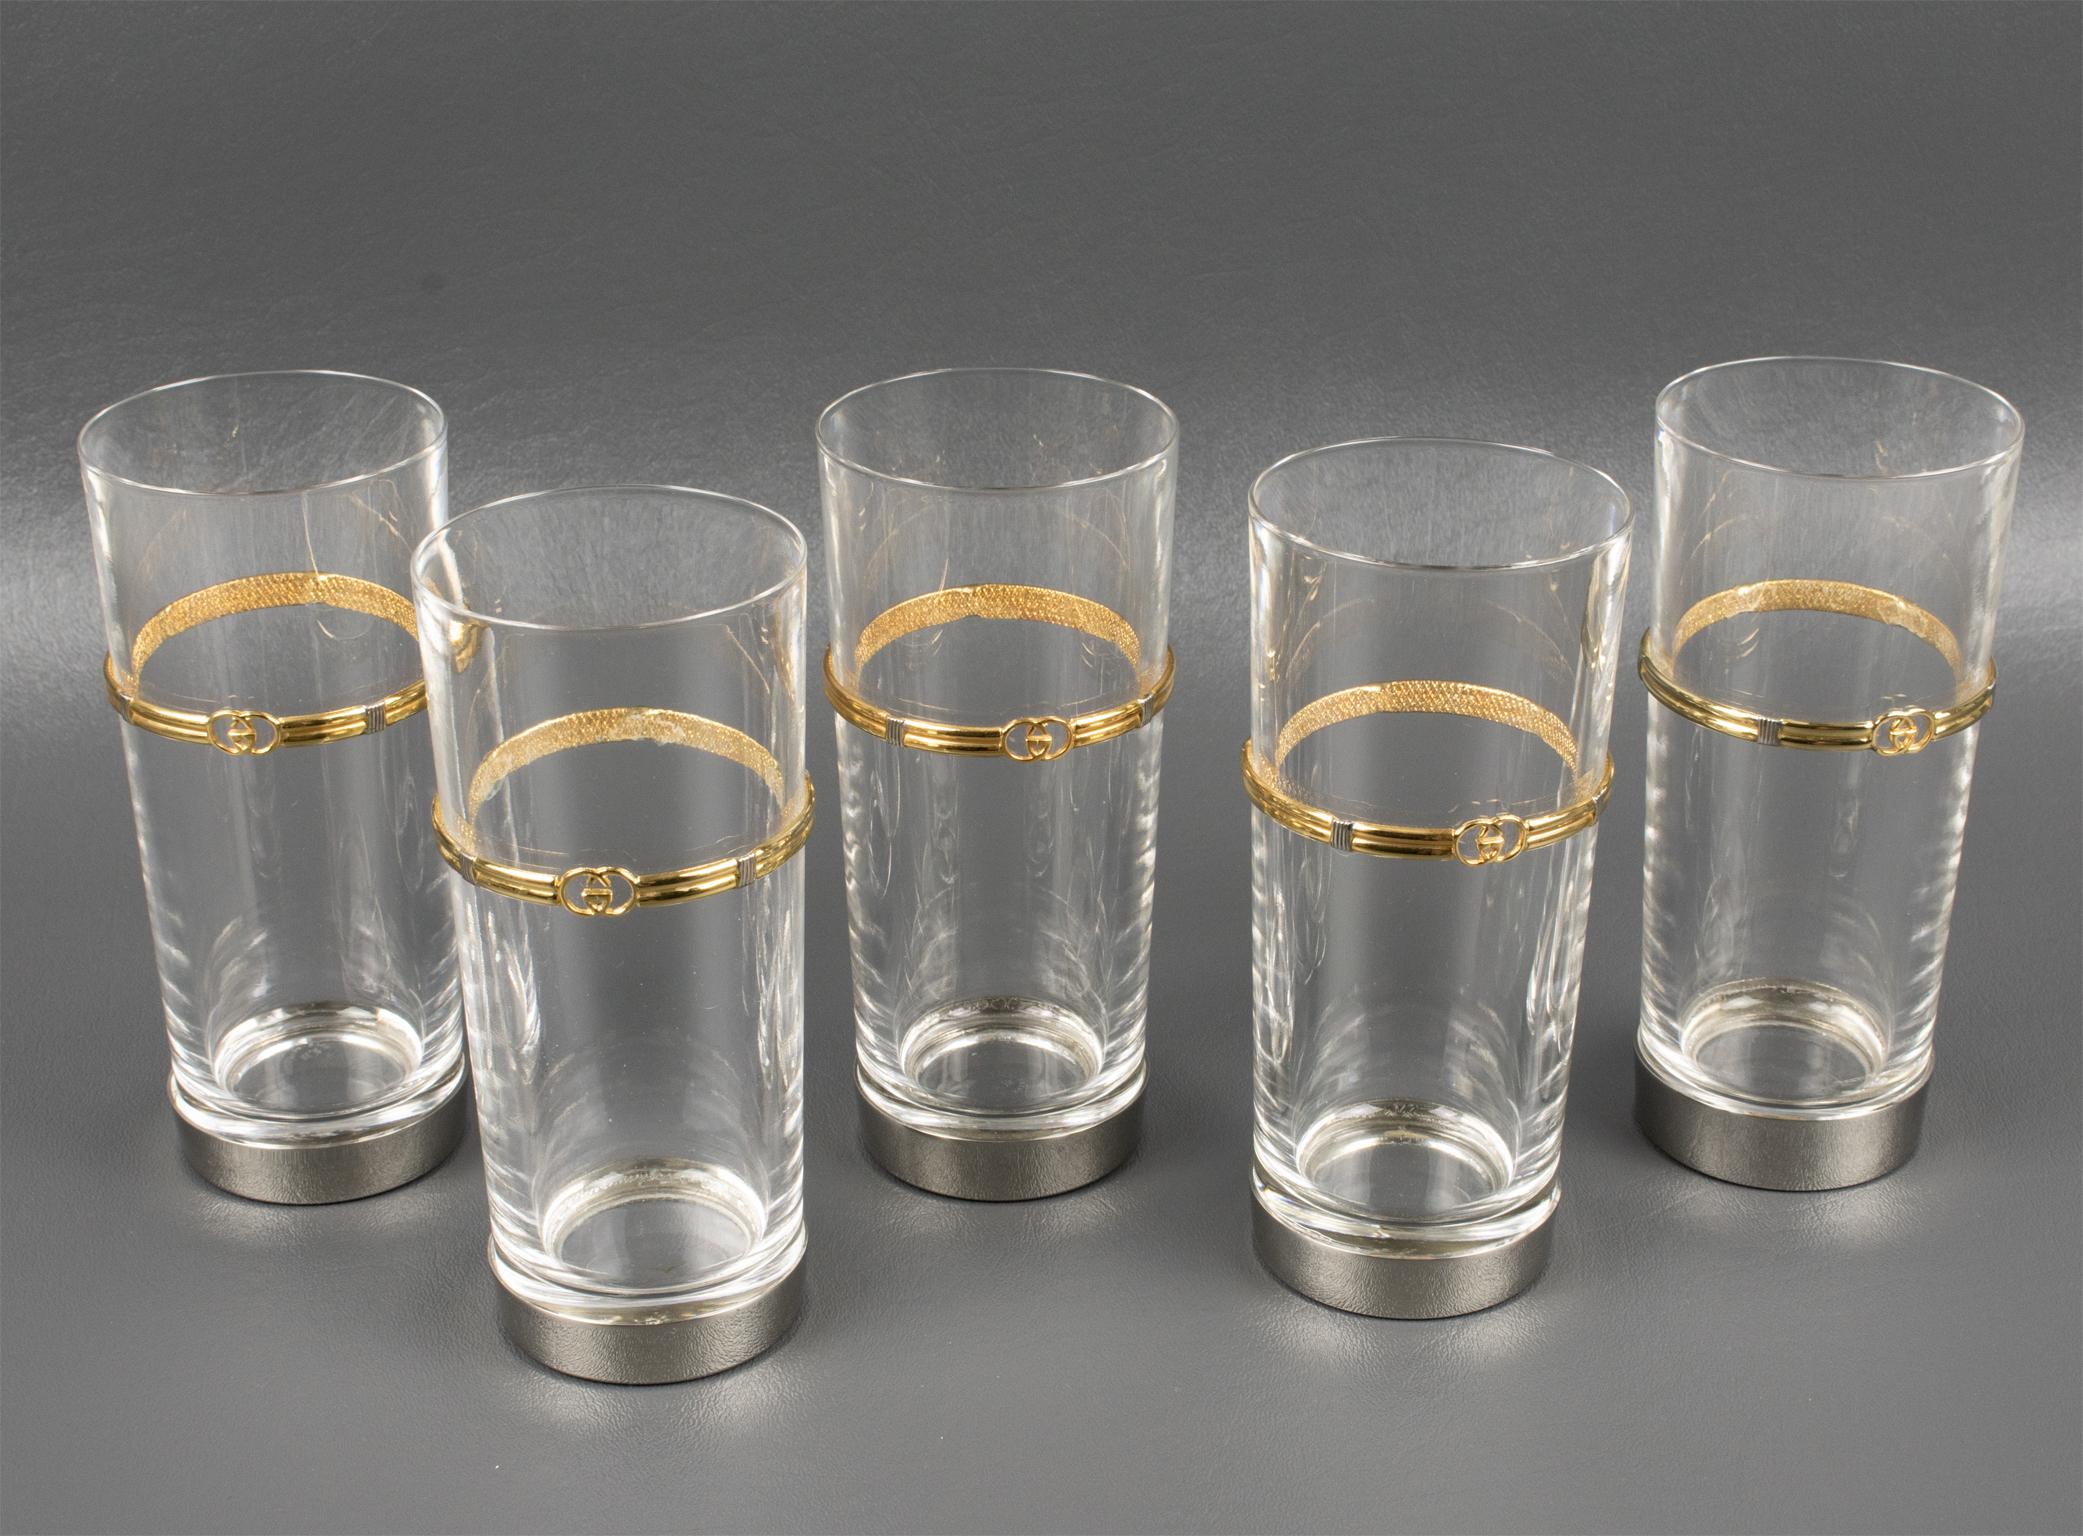 Entertain with style with this Gucci barware set of crystal highball tumbler glasses with a gold-plated GG logo.
This chic Italian hallmarked Gucci set of five glasses features tall tumbler-shaped crystal glasses with silver-plated metal bases and